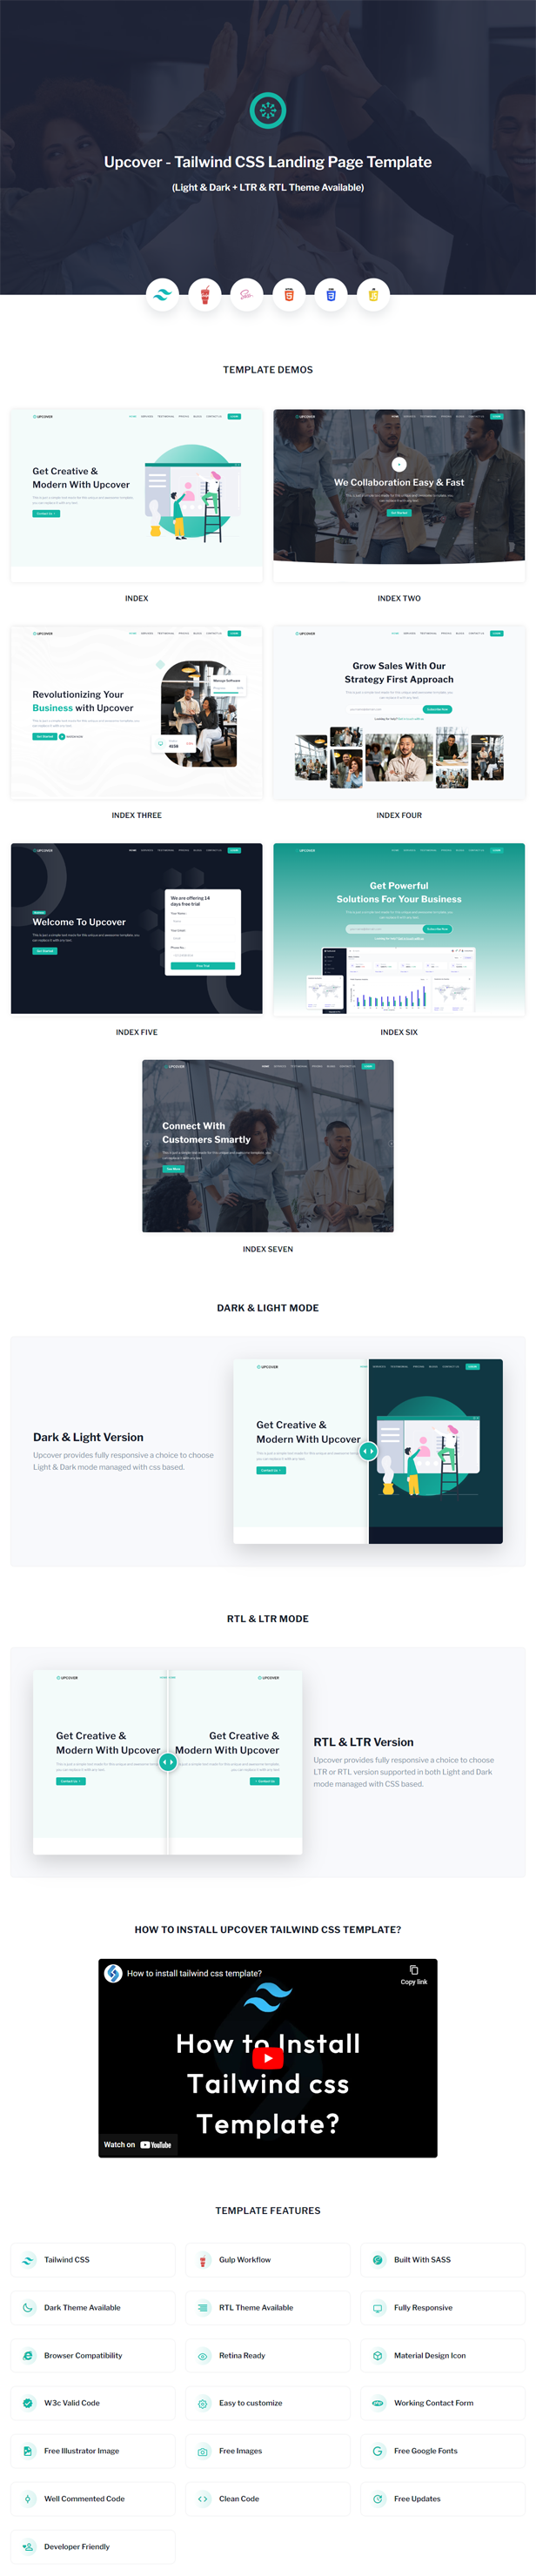 Upcover - Tailwind CSS Business & Corporate Landing Template - 7